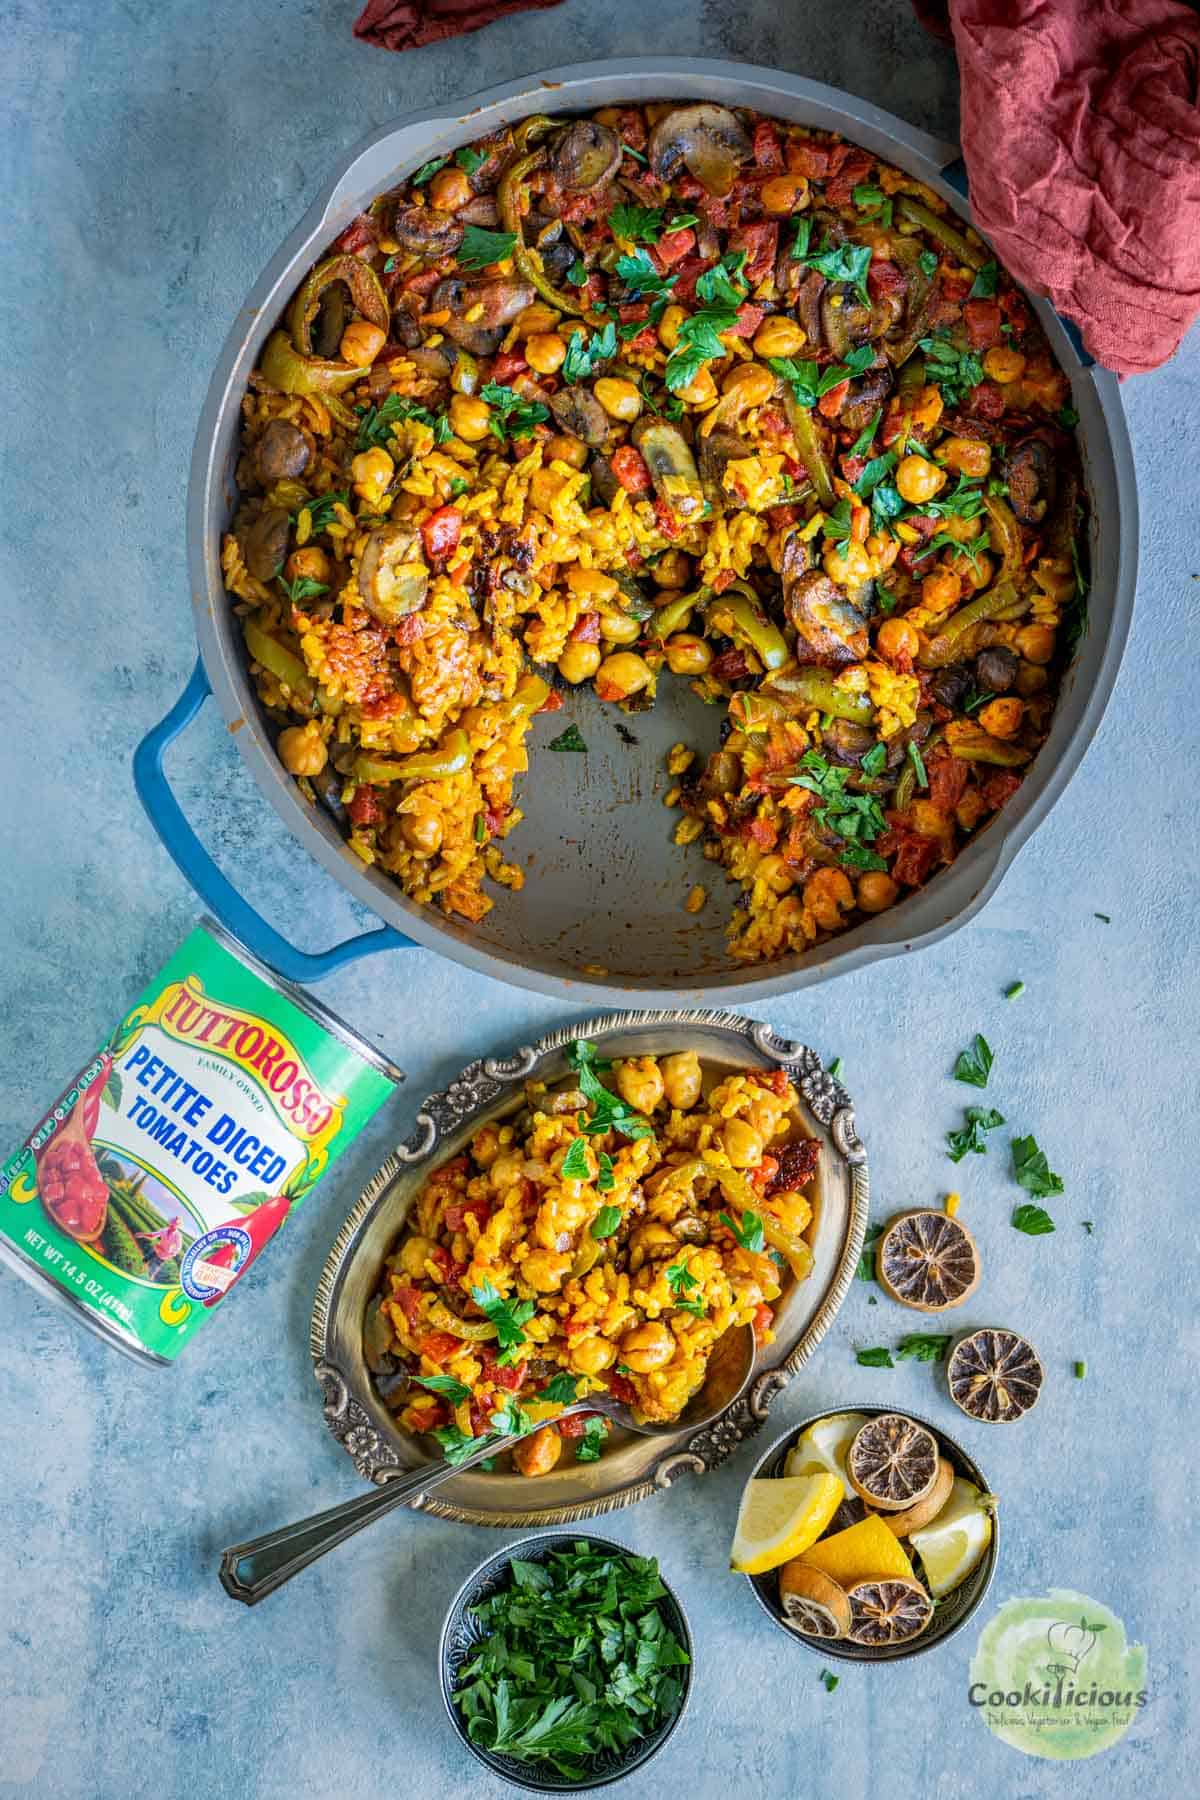 Vegan Paella in a pan and a small plate with paella on it